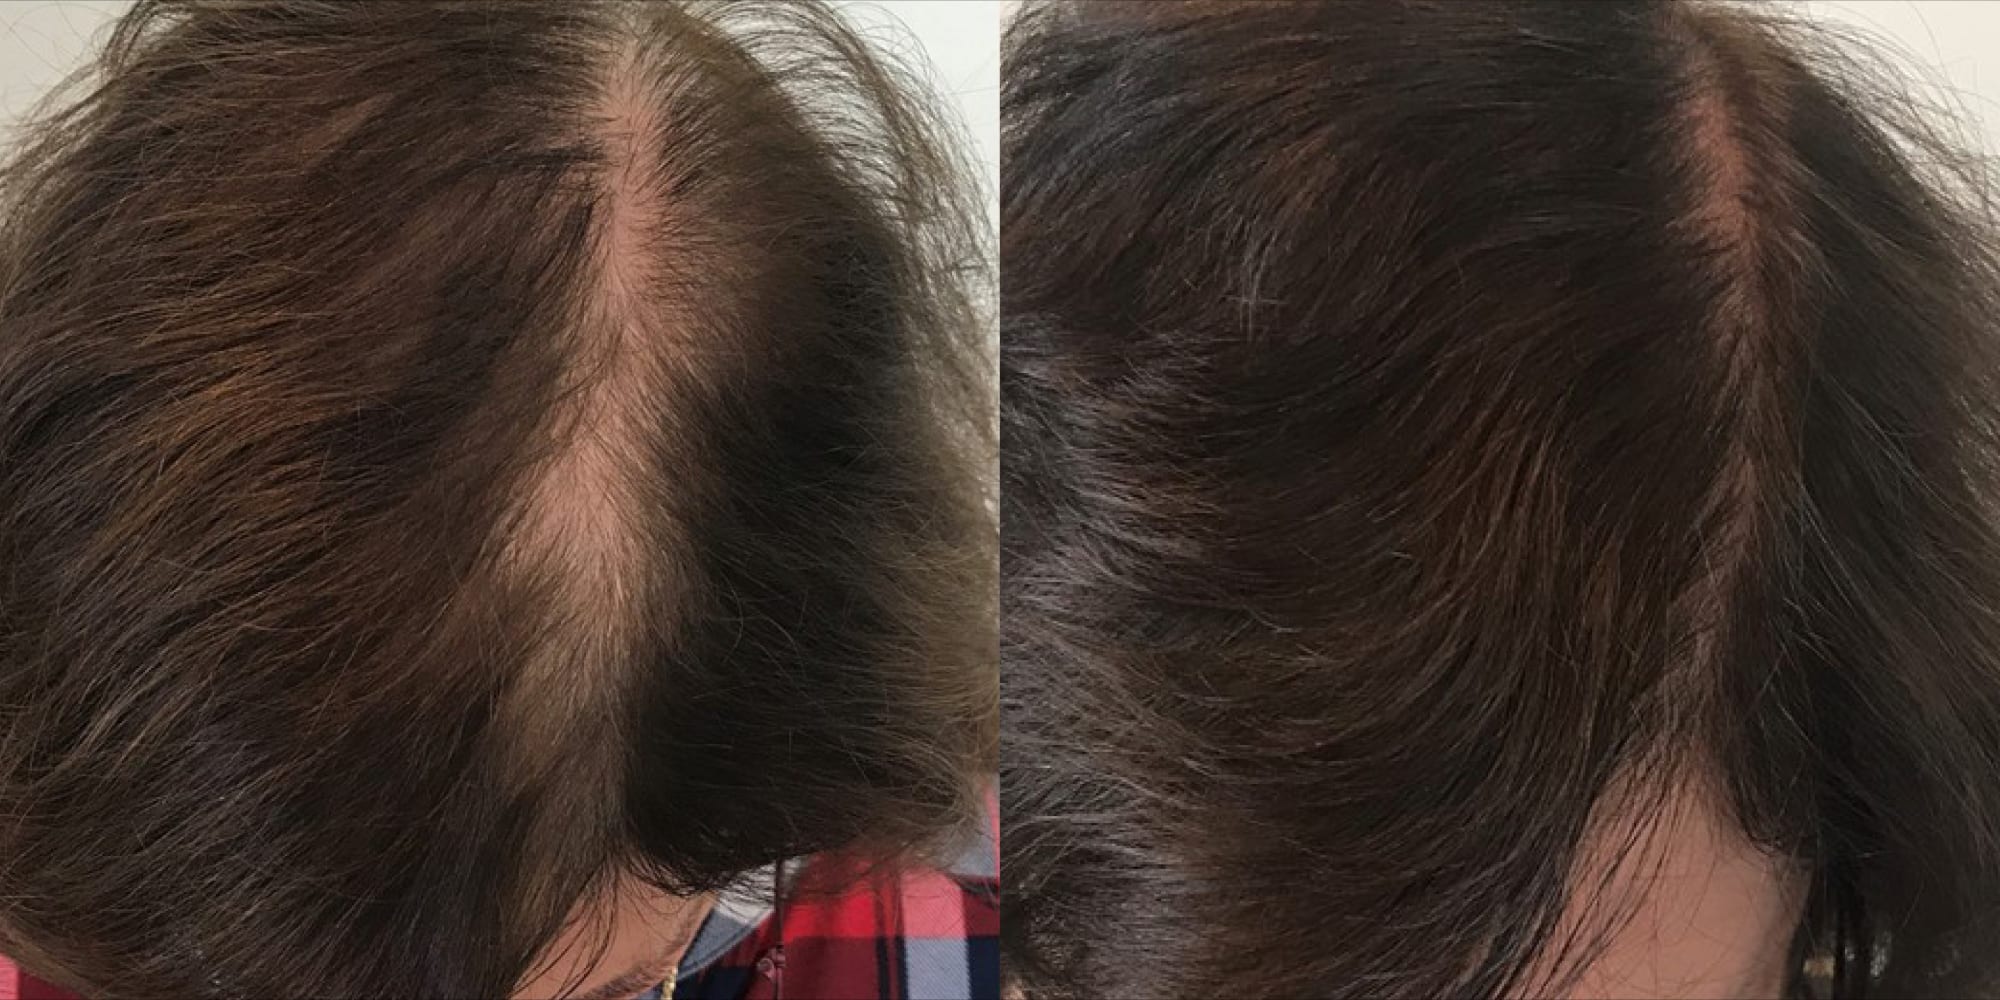 Hughes Center before and after keralase hair treatment